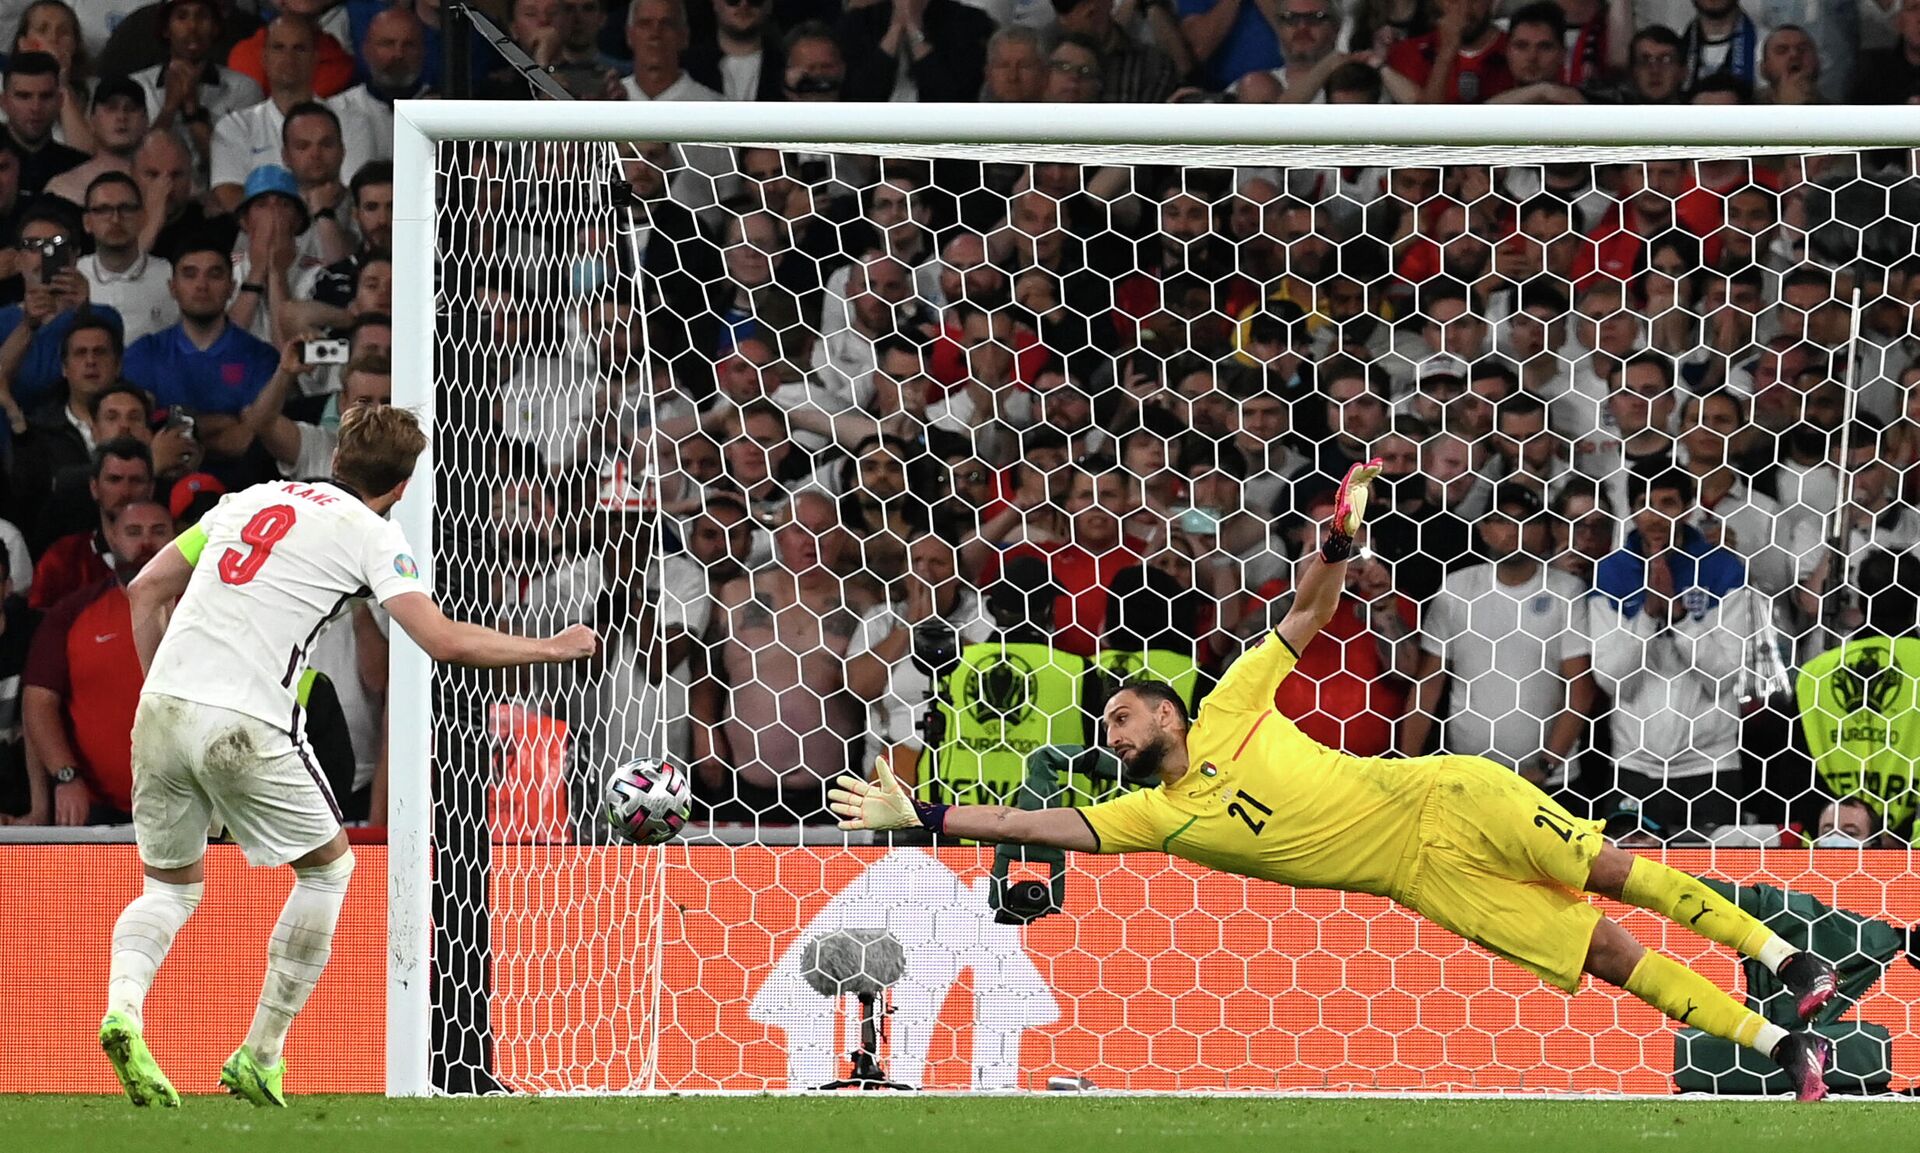 England's Harry Kanem left, shoots to score past Italy's goalkeeper Gianluigi Donnarumma during penalty shootout of the Euro 2020 soccer championship final match between England and Italy at Wembley Stadium in London, Sunday, July 11, 2021 - Sputnik International, 1920, 18.11.2022